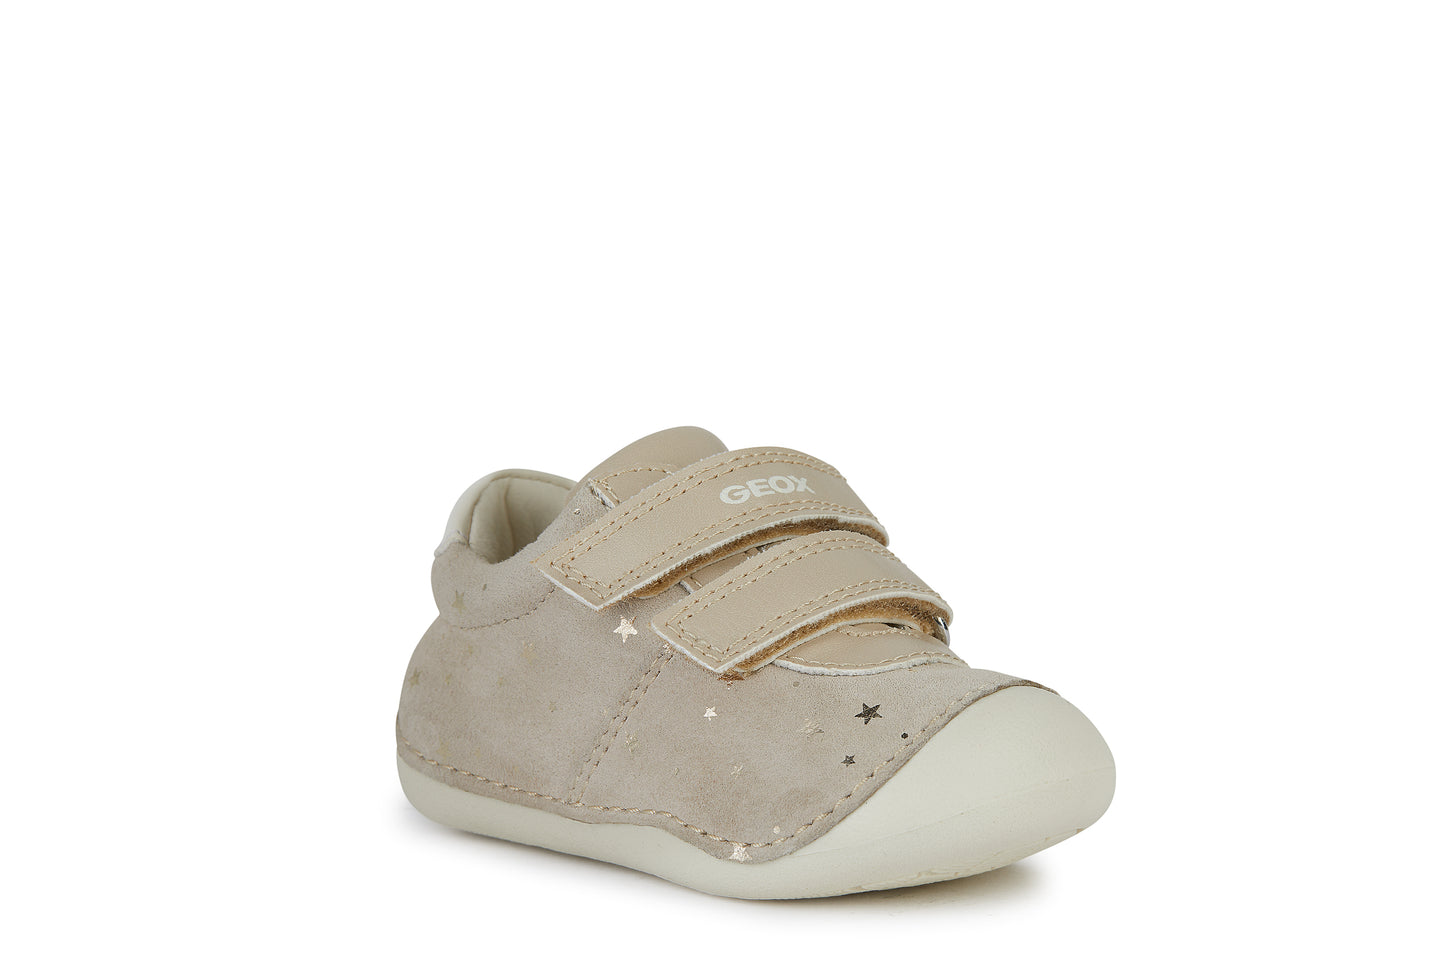 A girls pre walker by Geox, style B Tutim Girl, with toe bumper ,in beige suede with star detail and double velcro fastening. Angled view.